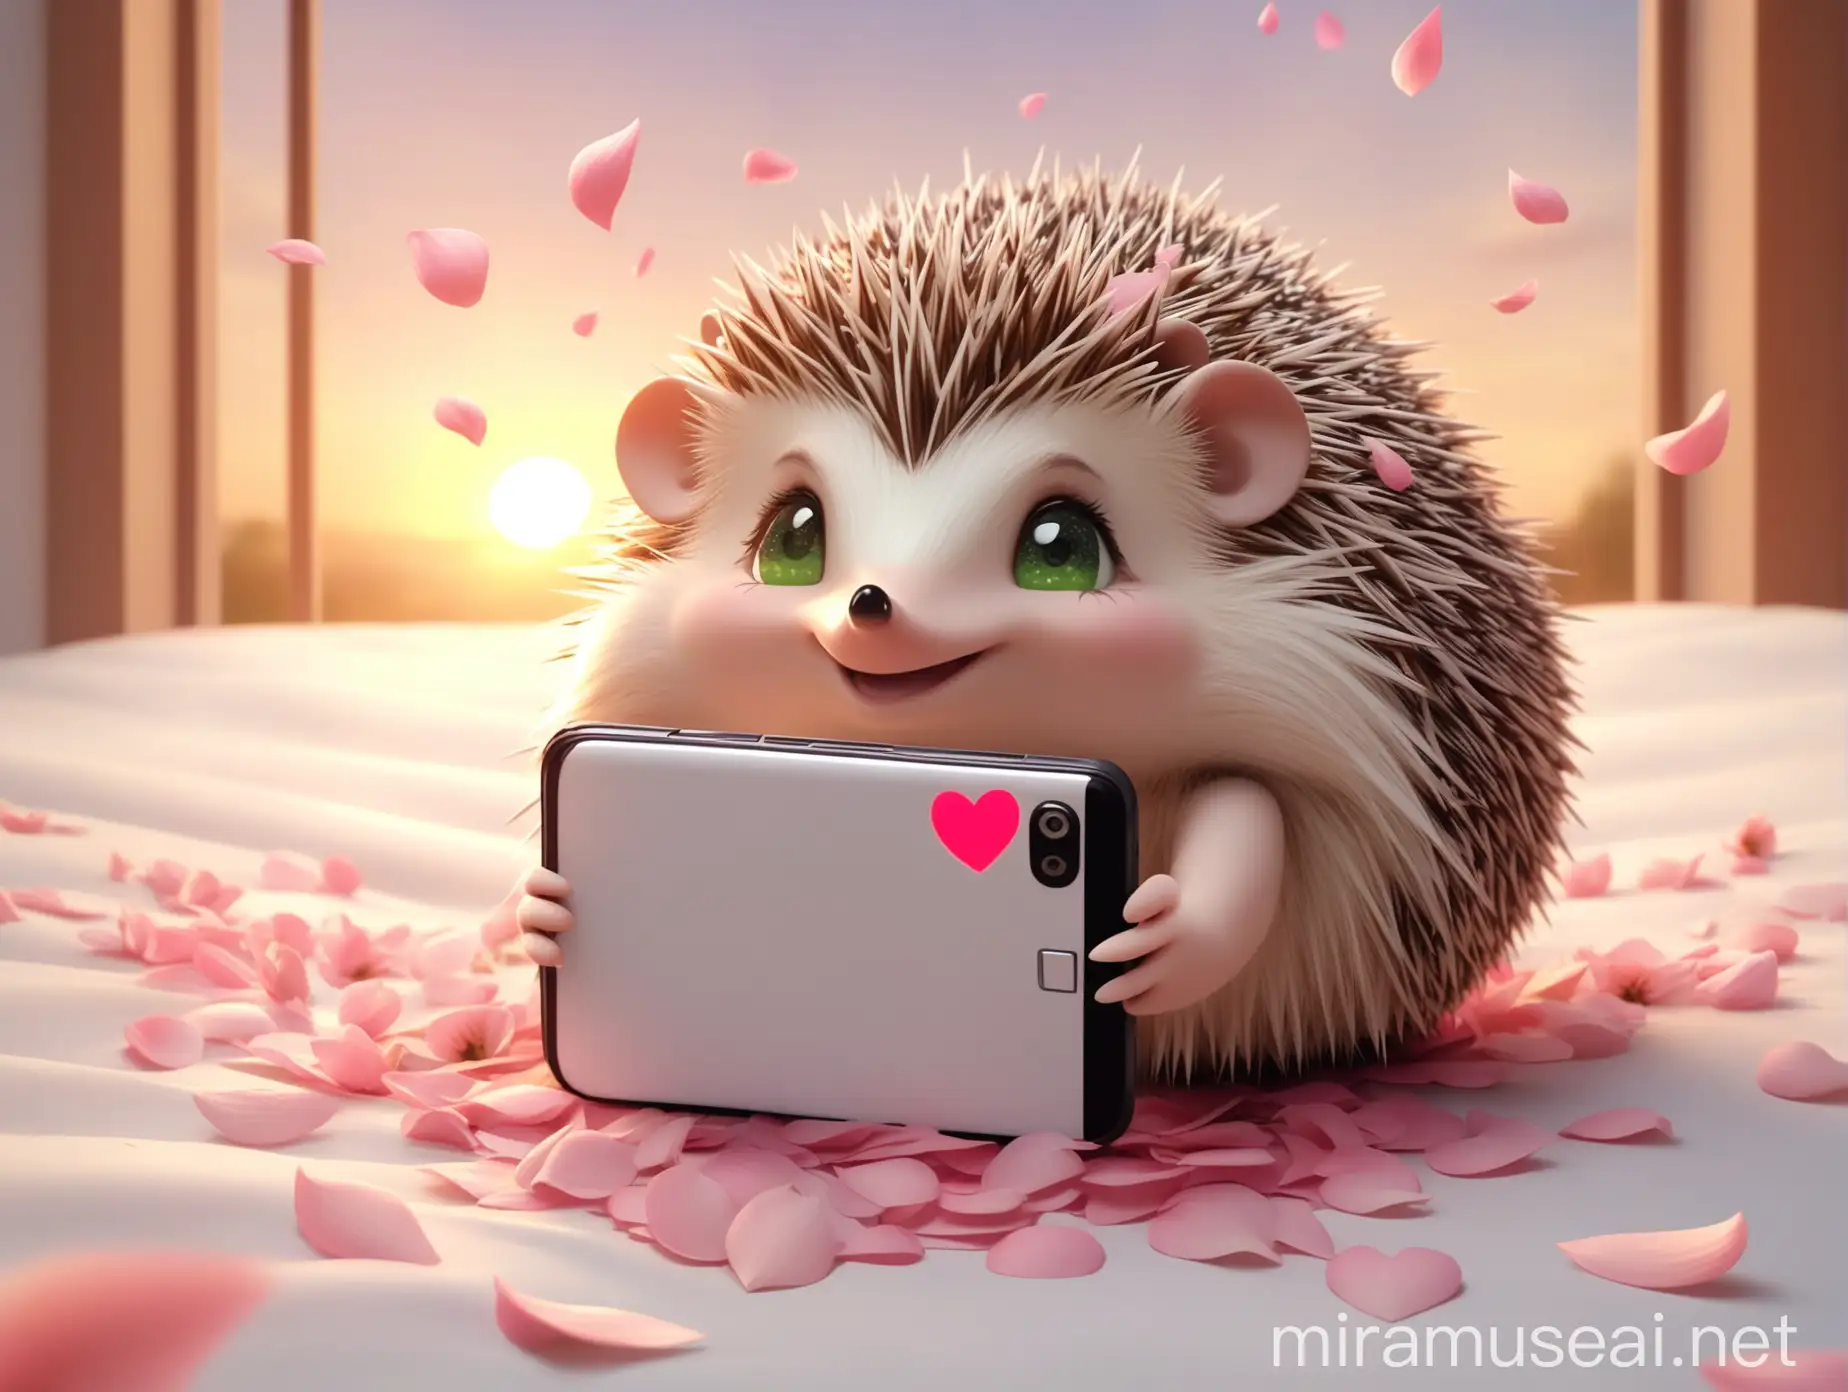 Romantic Hedgehog Reading Love Message on Smartphone with Falling Flower Petals